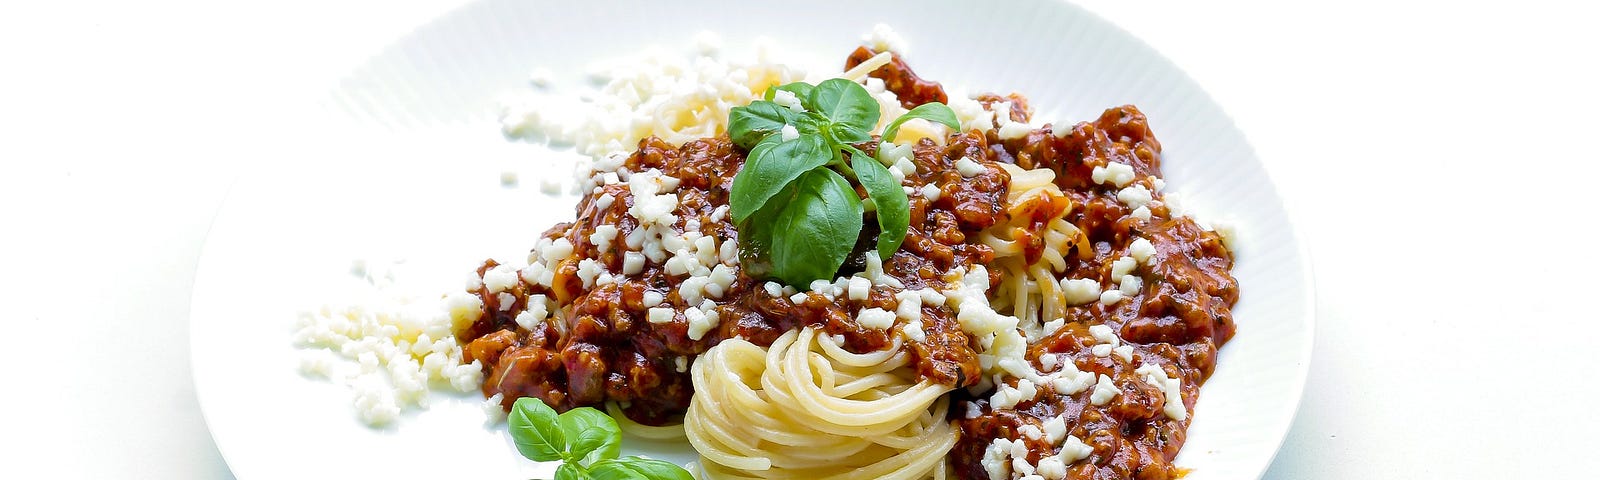 Plate with spaghetti bolognese